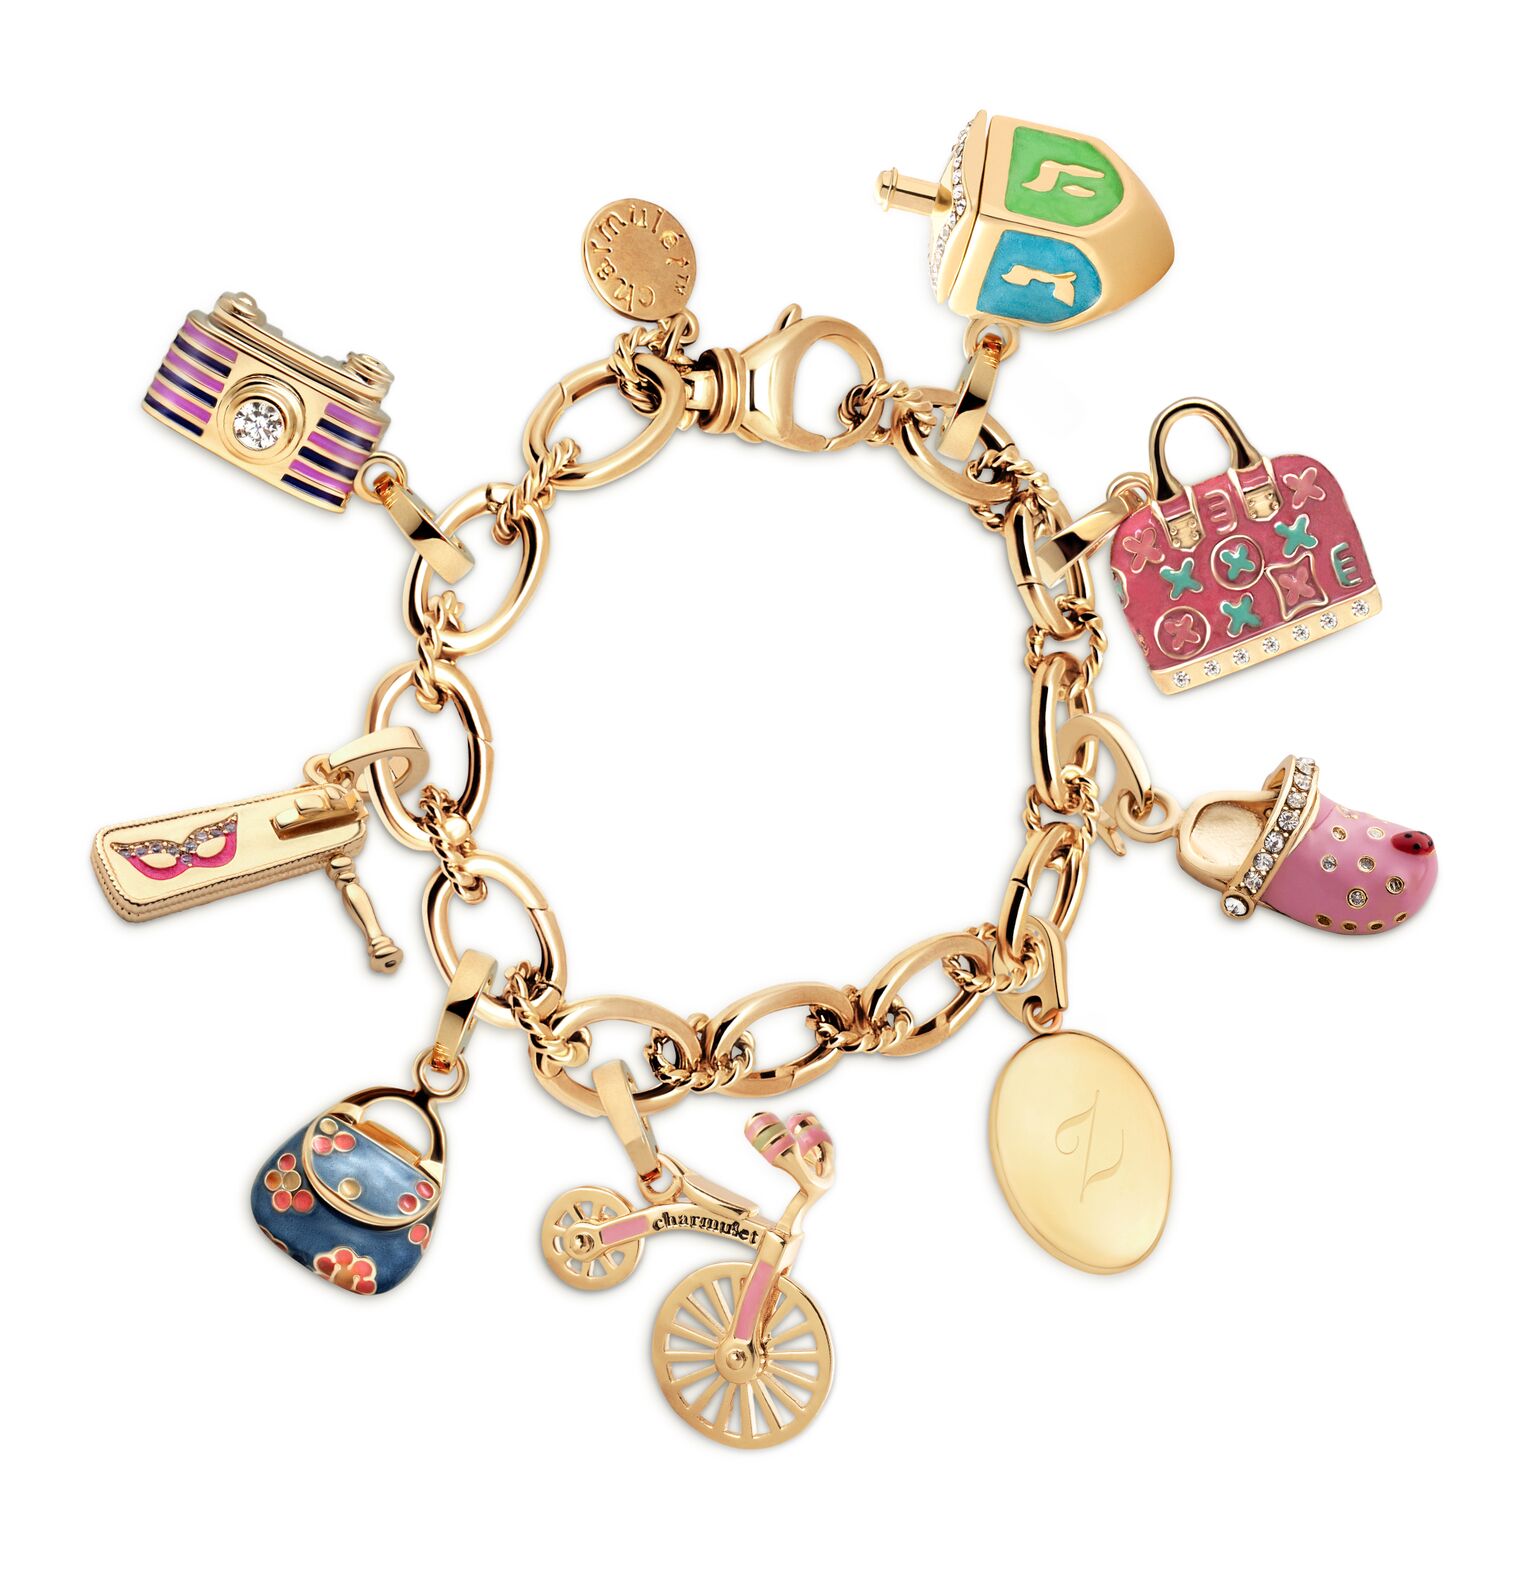 All Charmulet charms and charm bracelets are of the highest quality and designed to delight and enchant.